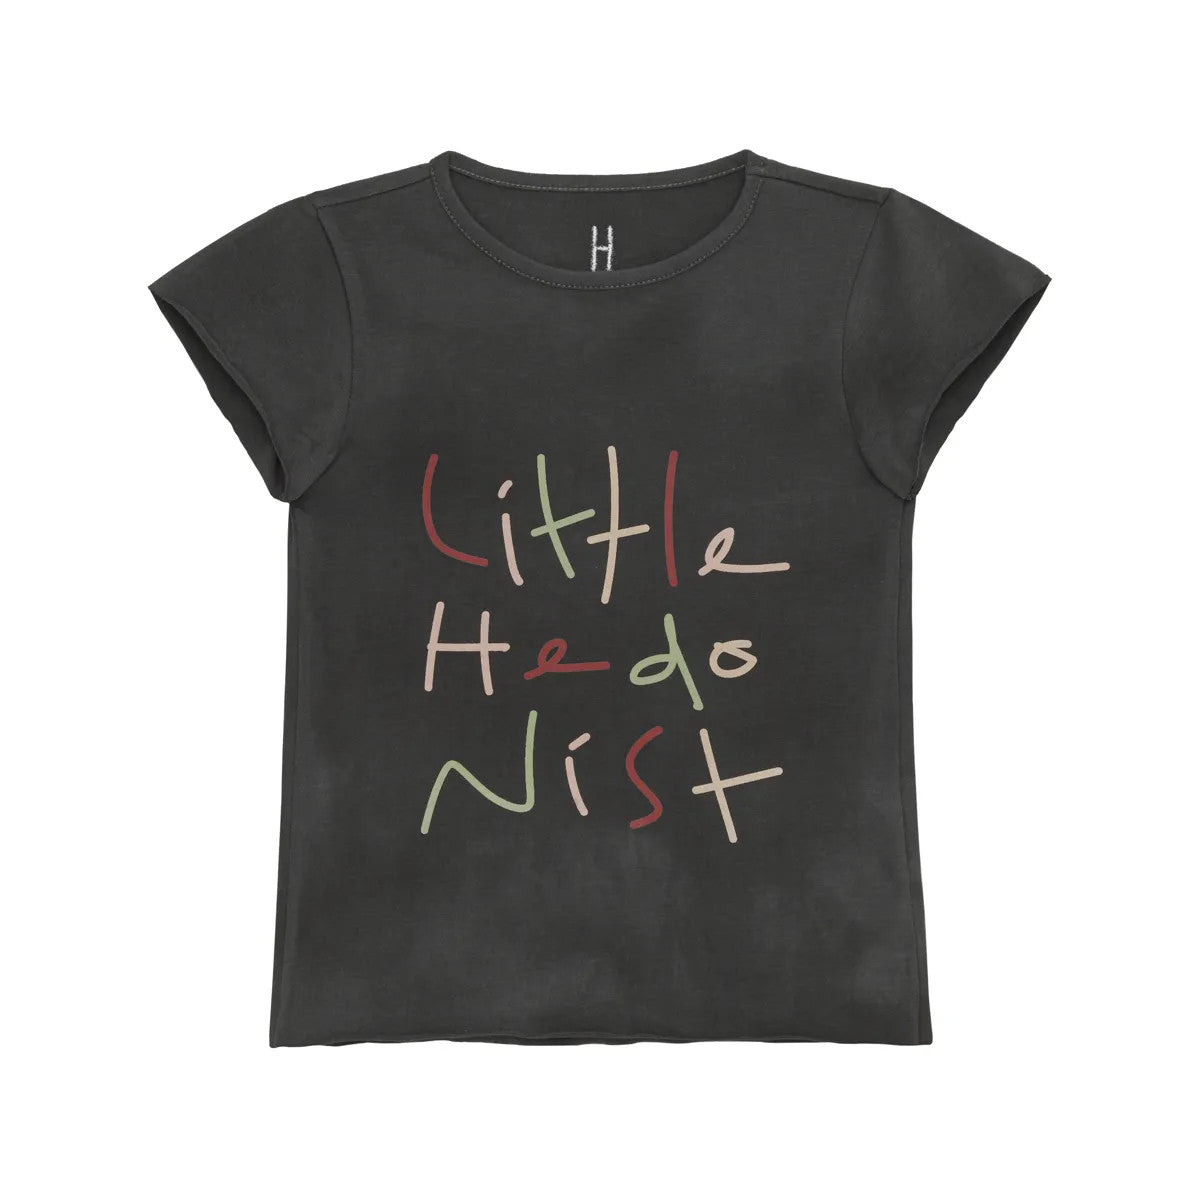 Little Hedonist unisex organic cotton t-shirt in dark grey with Little Hedonist print on the front